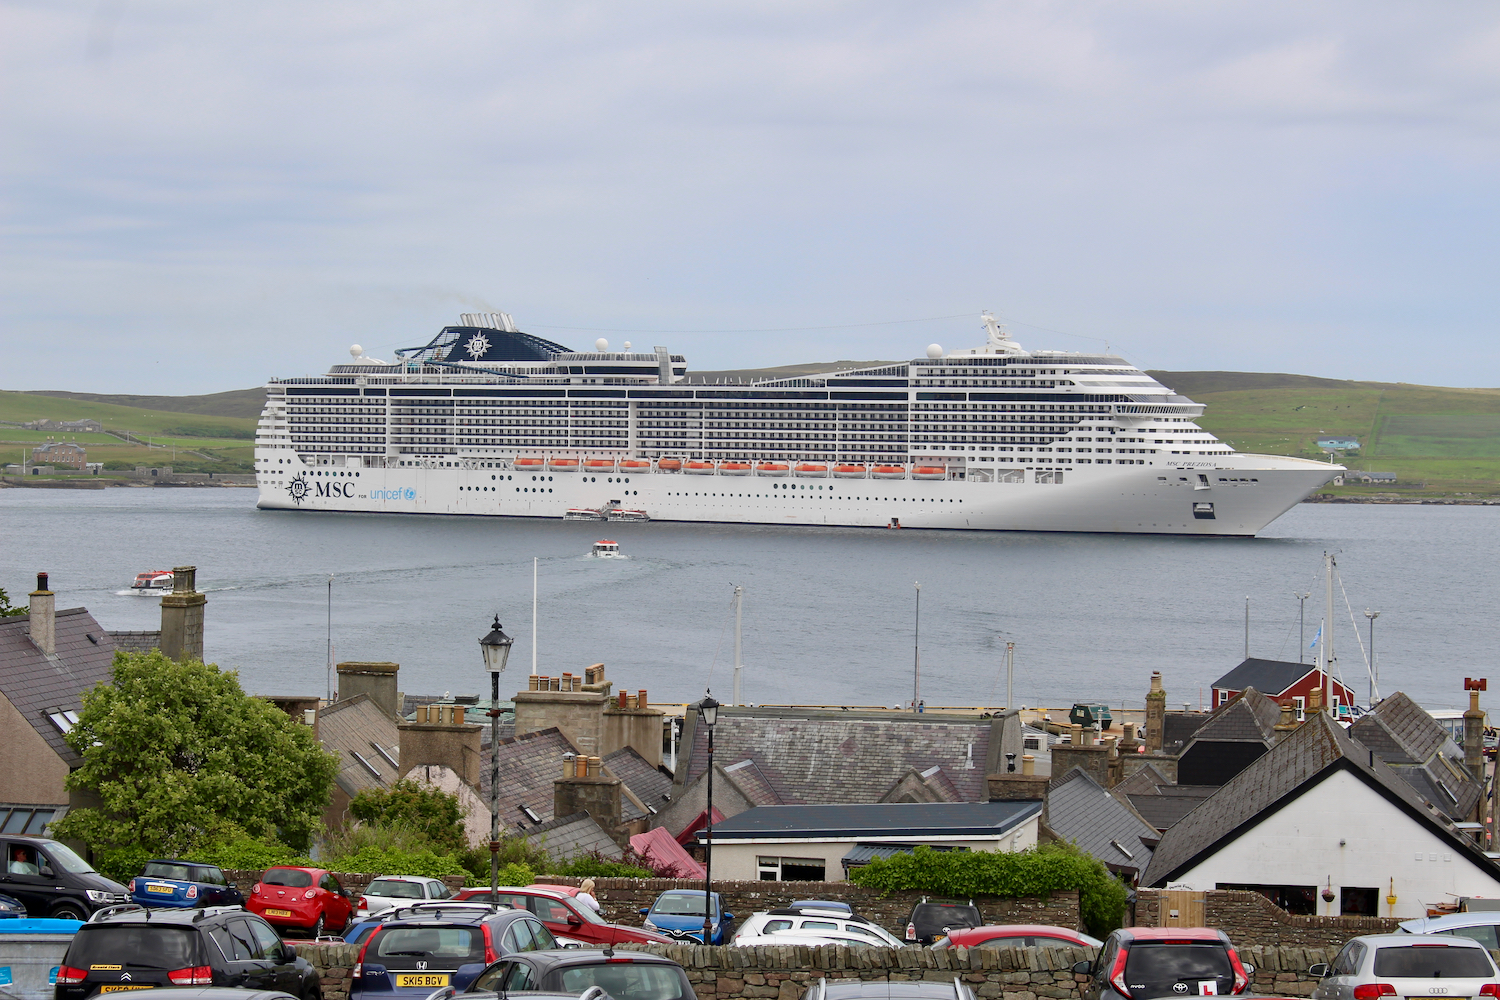 Largest cruise ship of the year arrives in town Shetland News